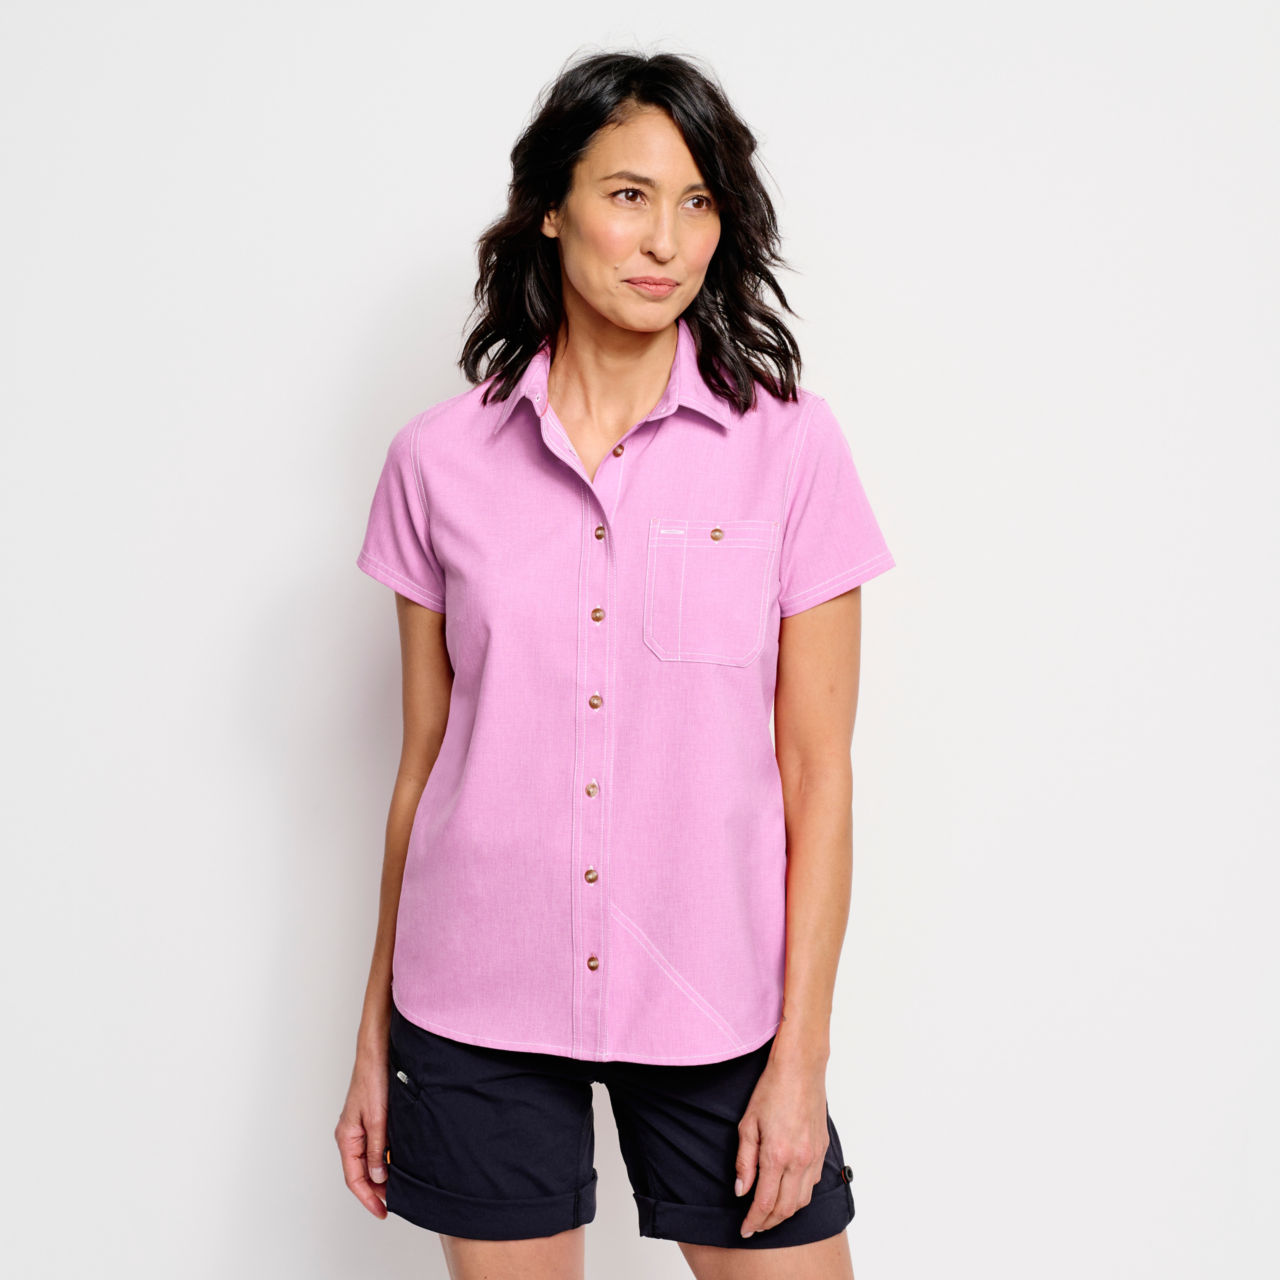 Women’s Tech Chambray Short-Sleeved Work Shirt - DUSTY BLUE FISH BLOCK CAMO image number 1